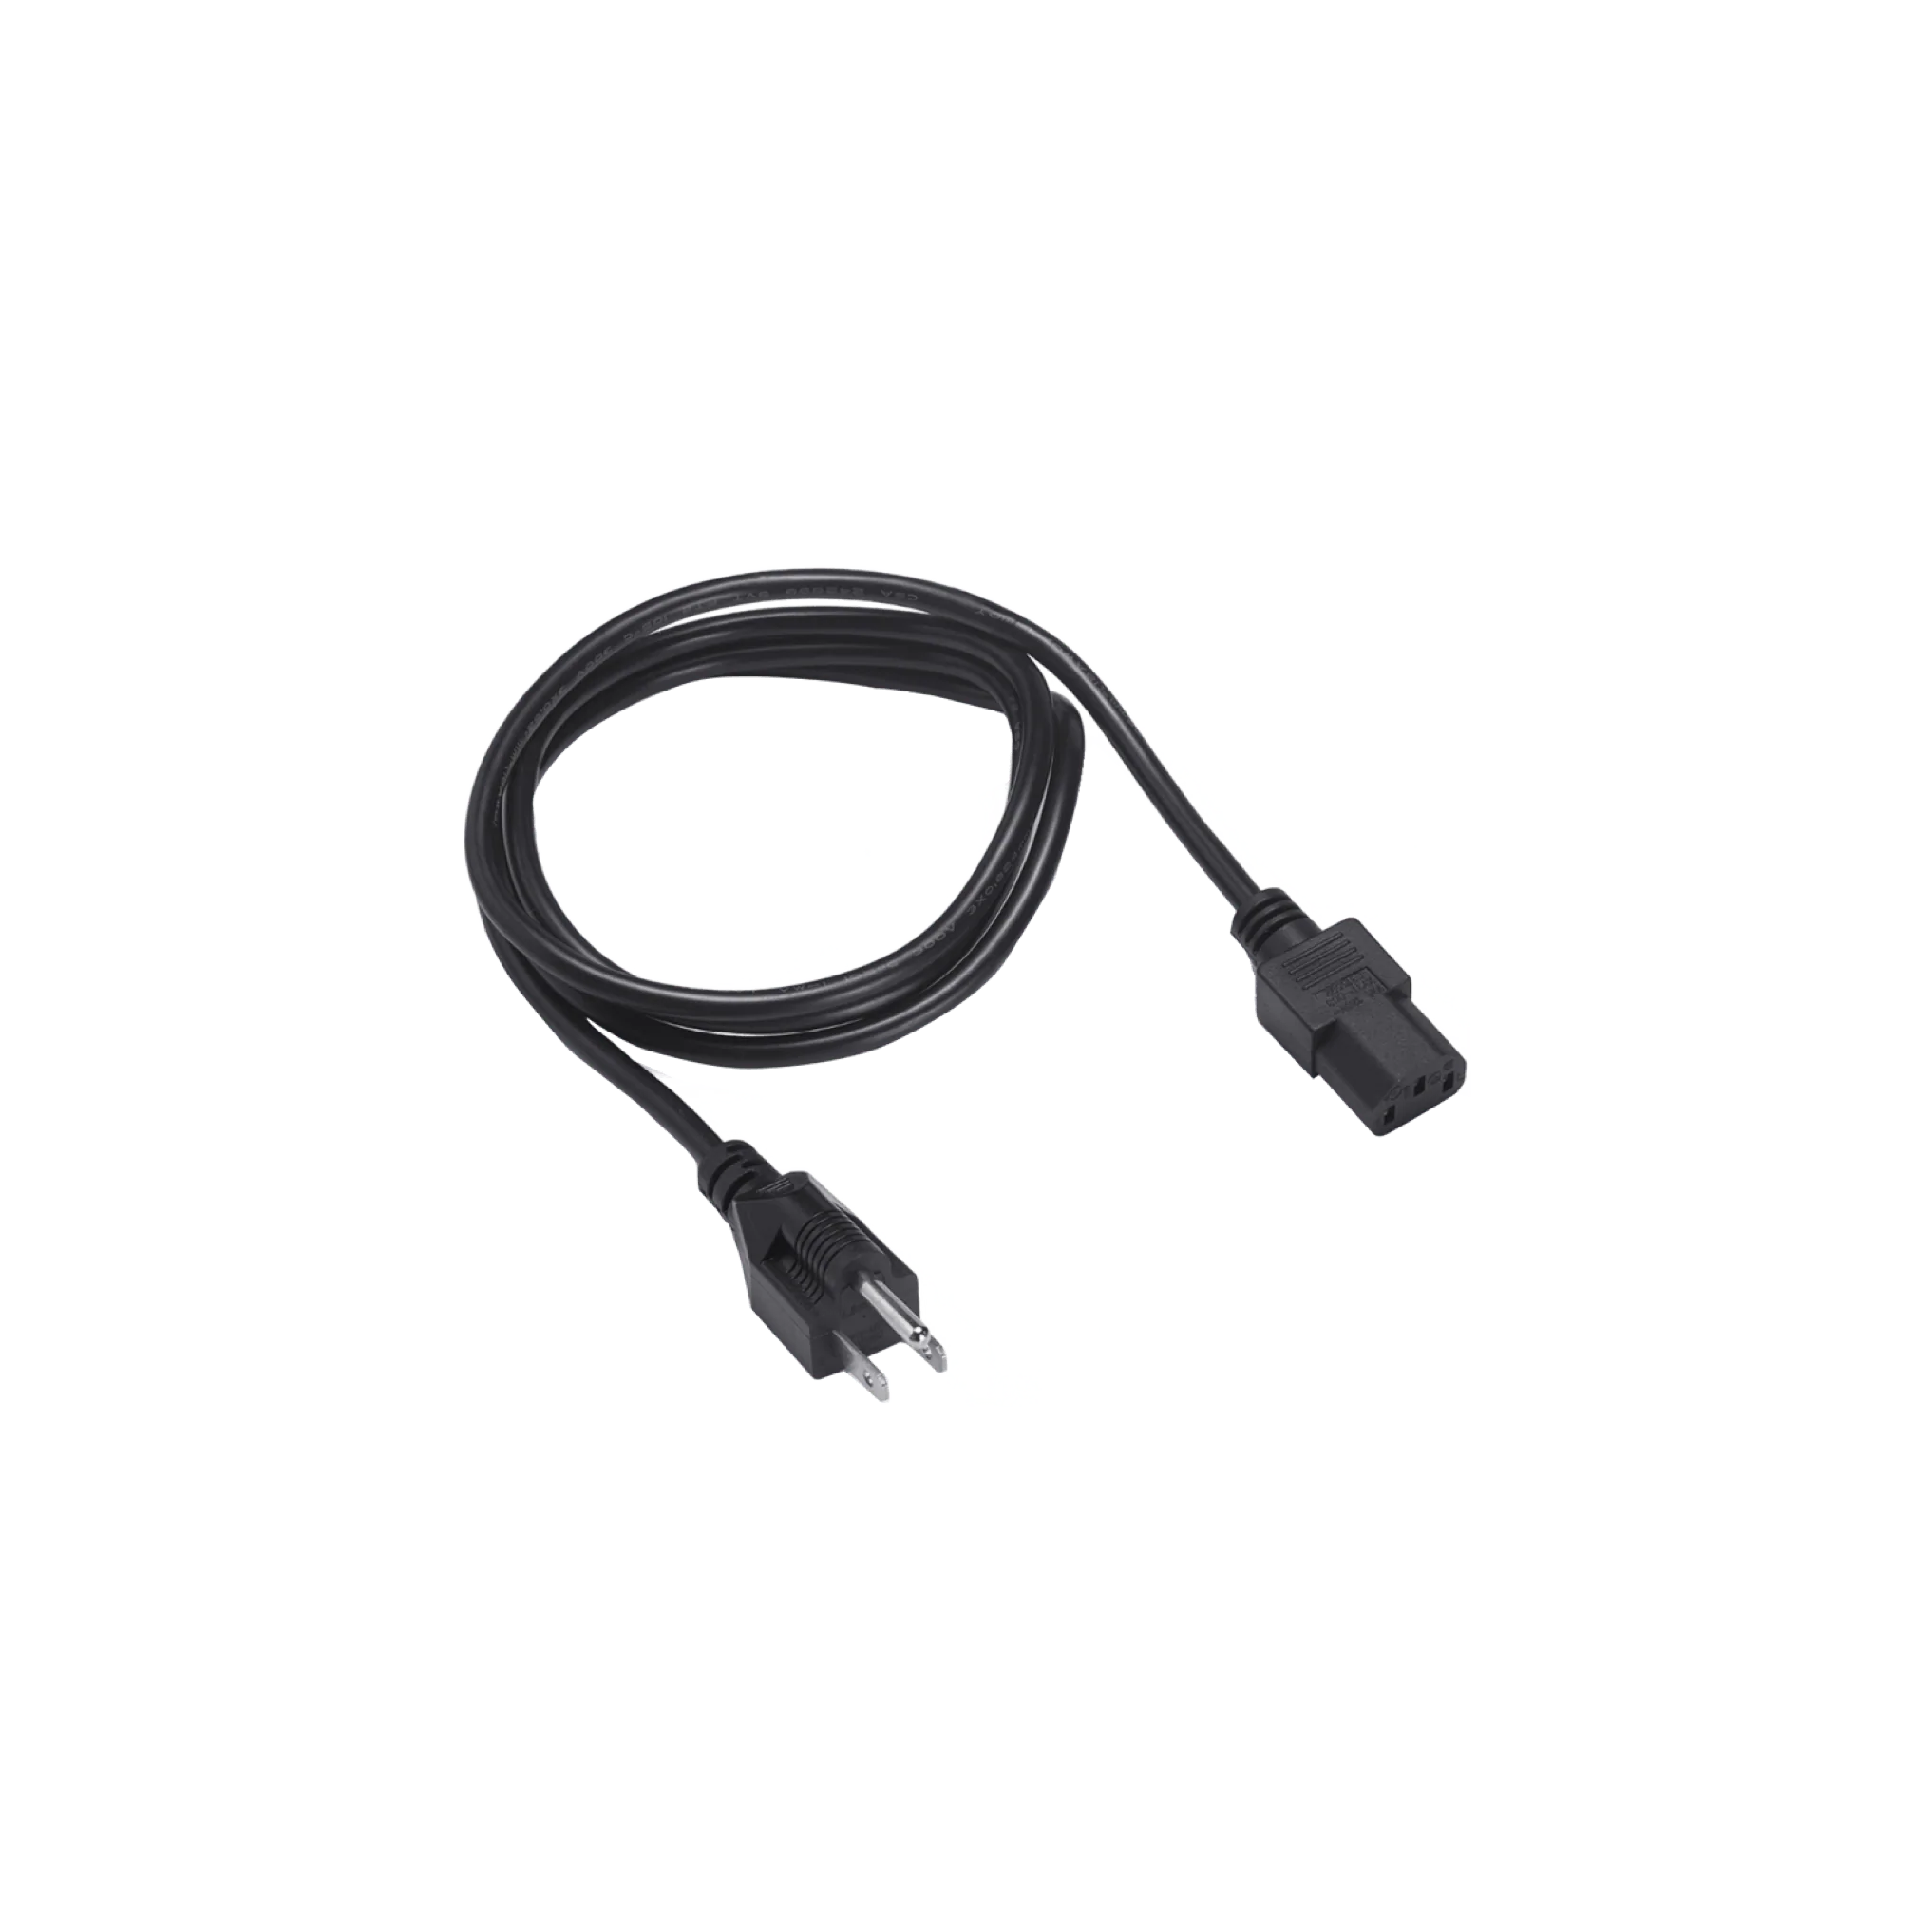 A black power cord with a black plug available for shipping in 1-2 weeks.